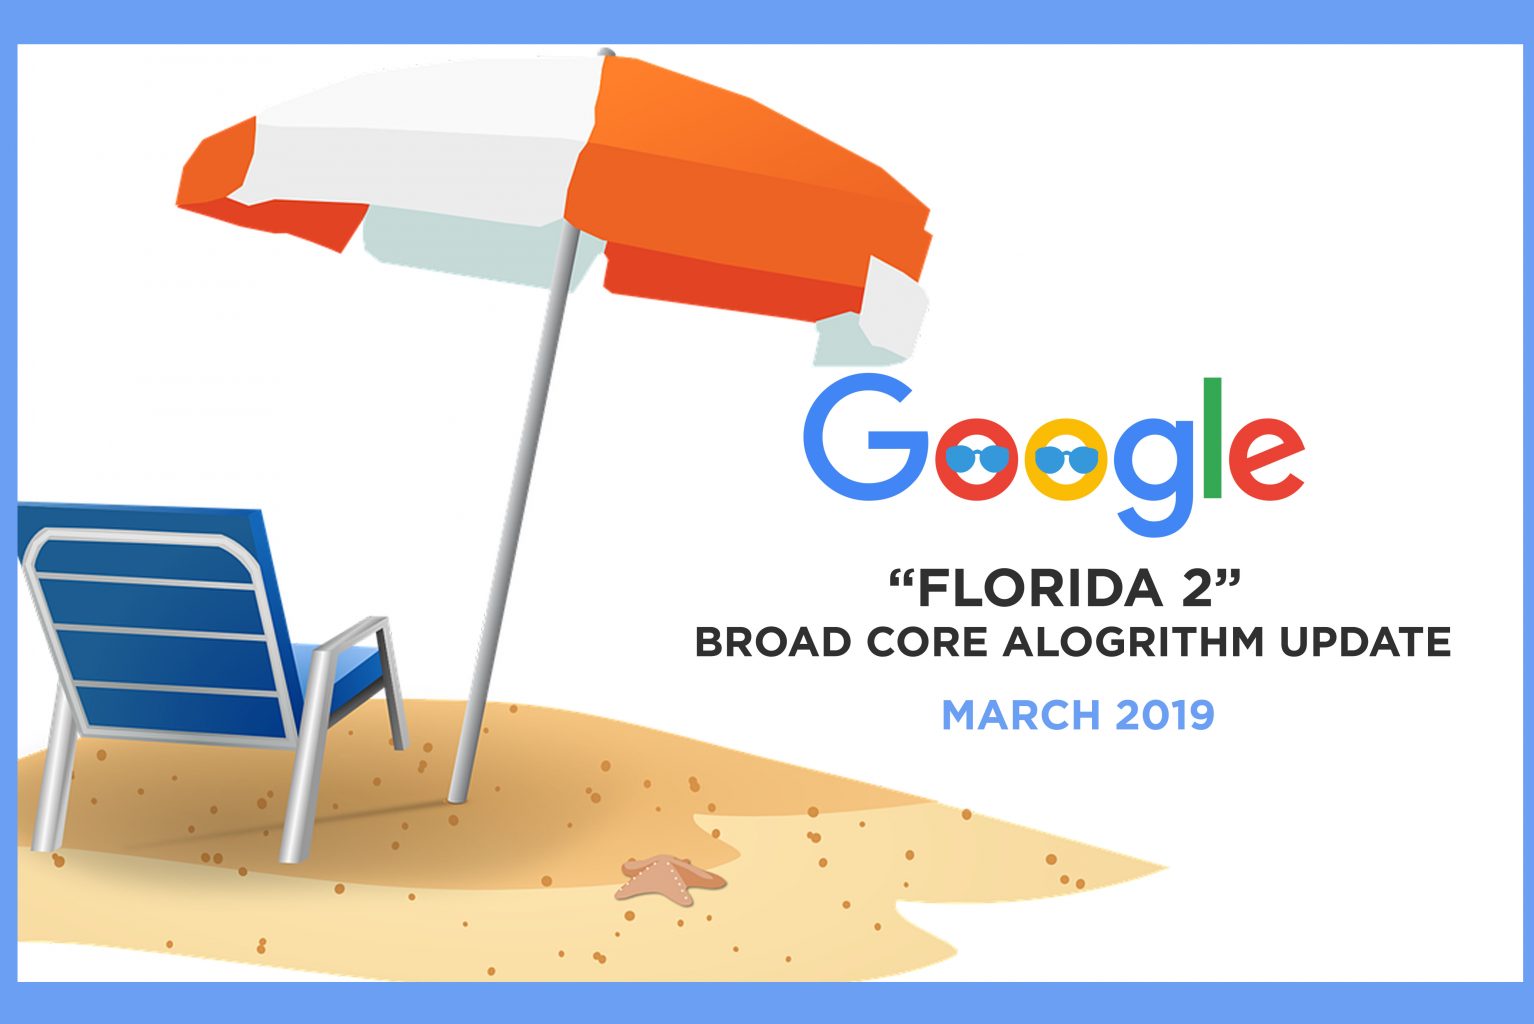 Have you been hit by Google March 2019 Core Update AKA the Florida 2 Update? Here are some tips on what you can do to inoculate your site against any negative ranking changes.